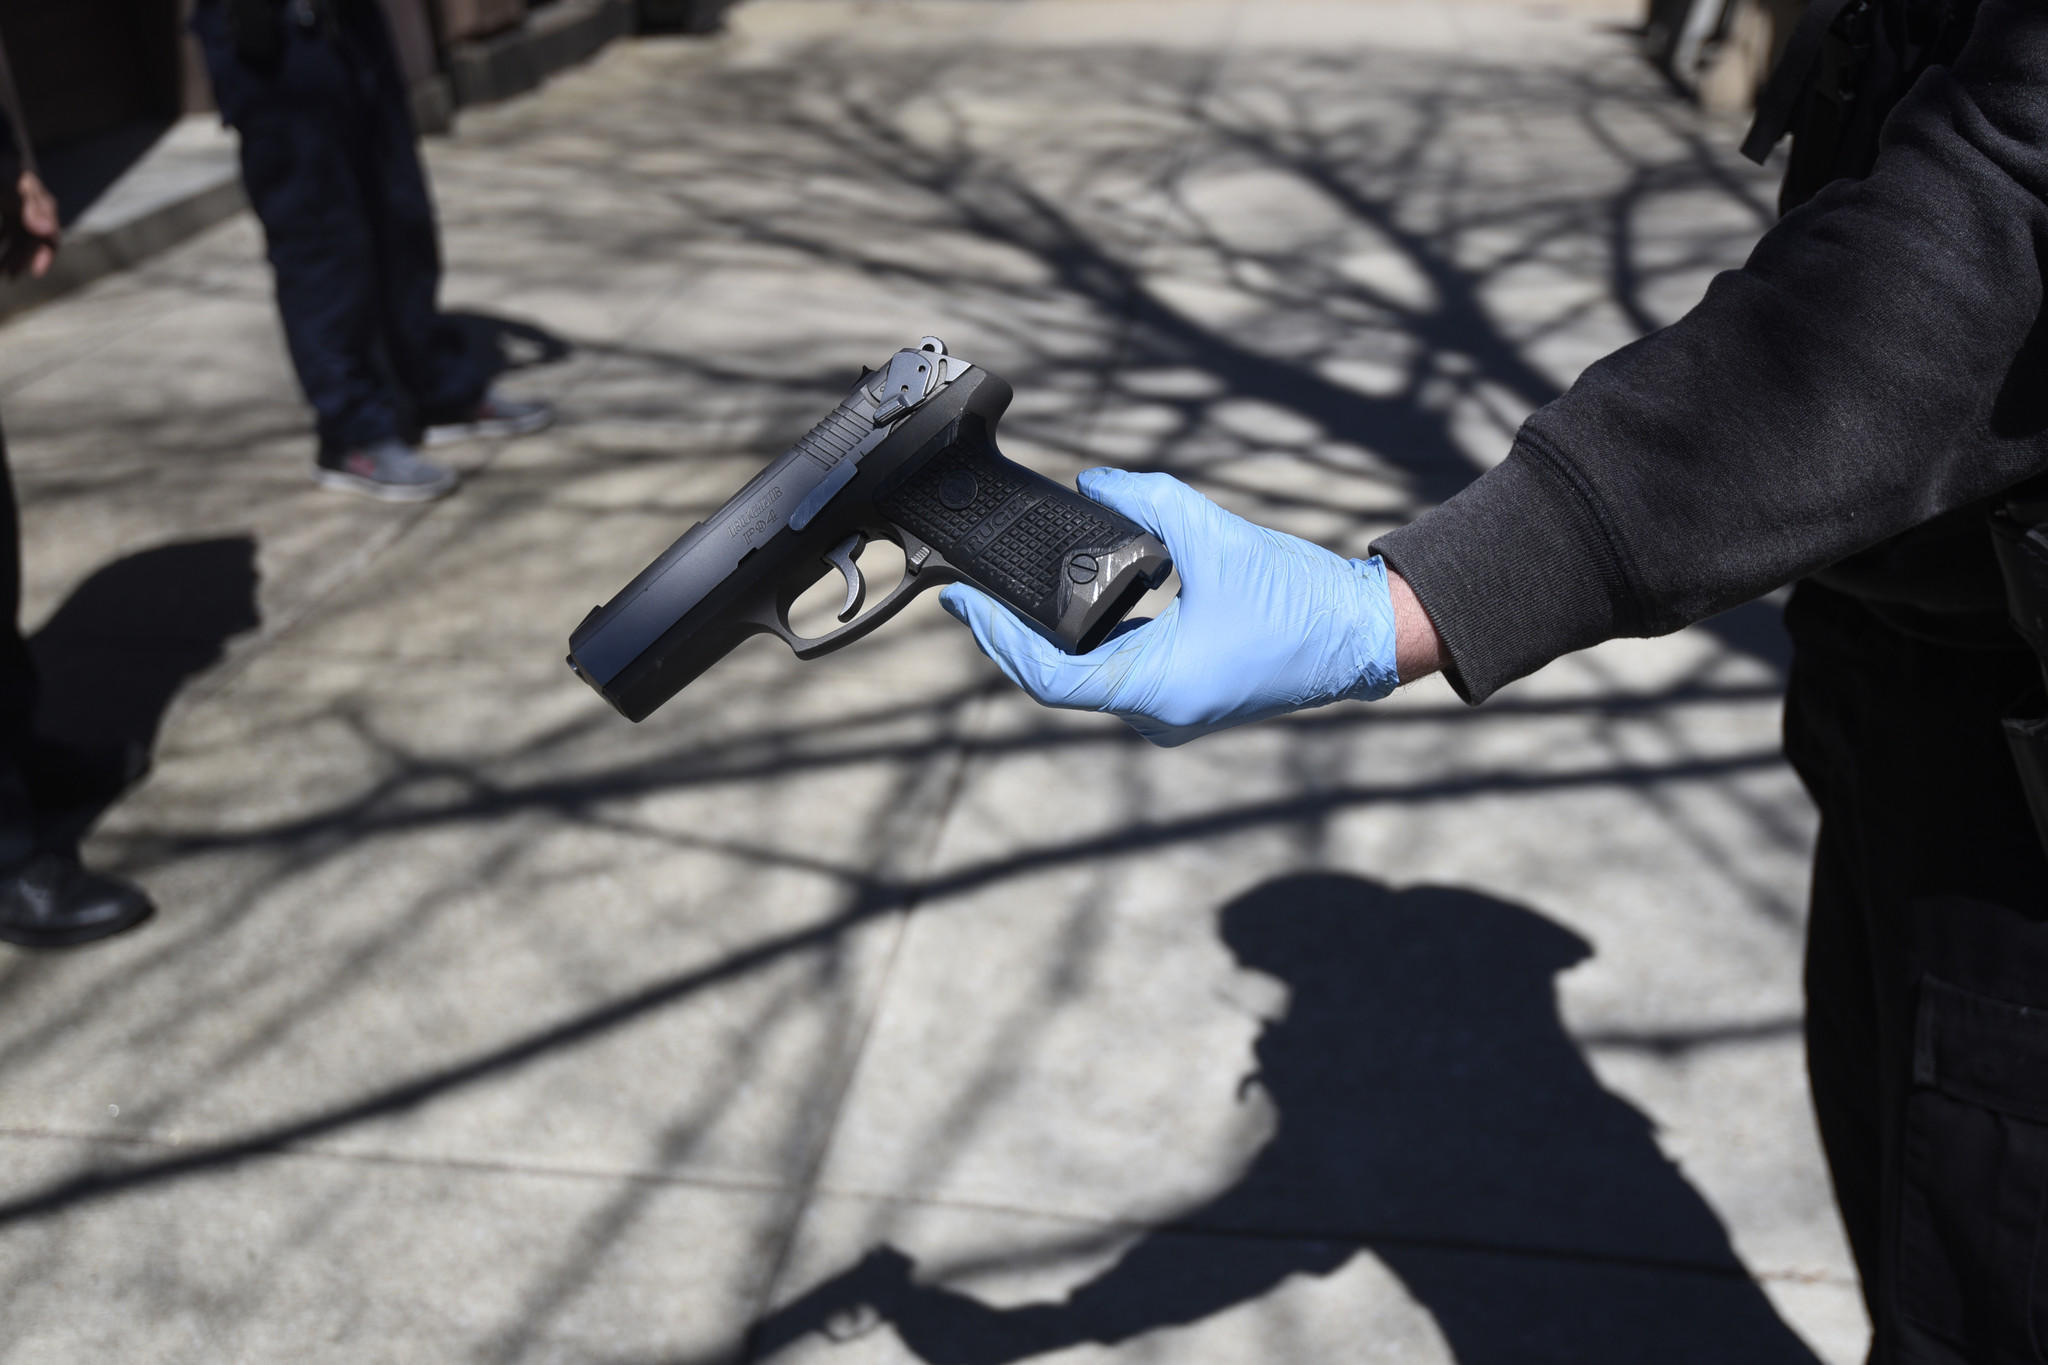 Arrests in Baltimore for illegal guns often lead to dropped charges or ... - Baltimore Sun